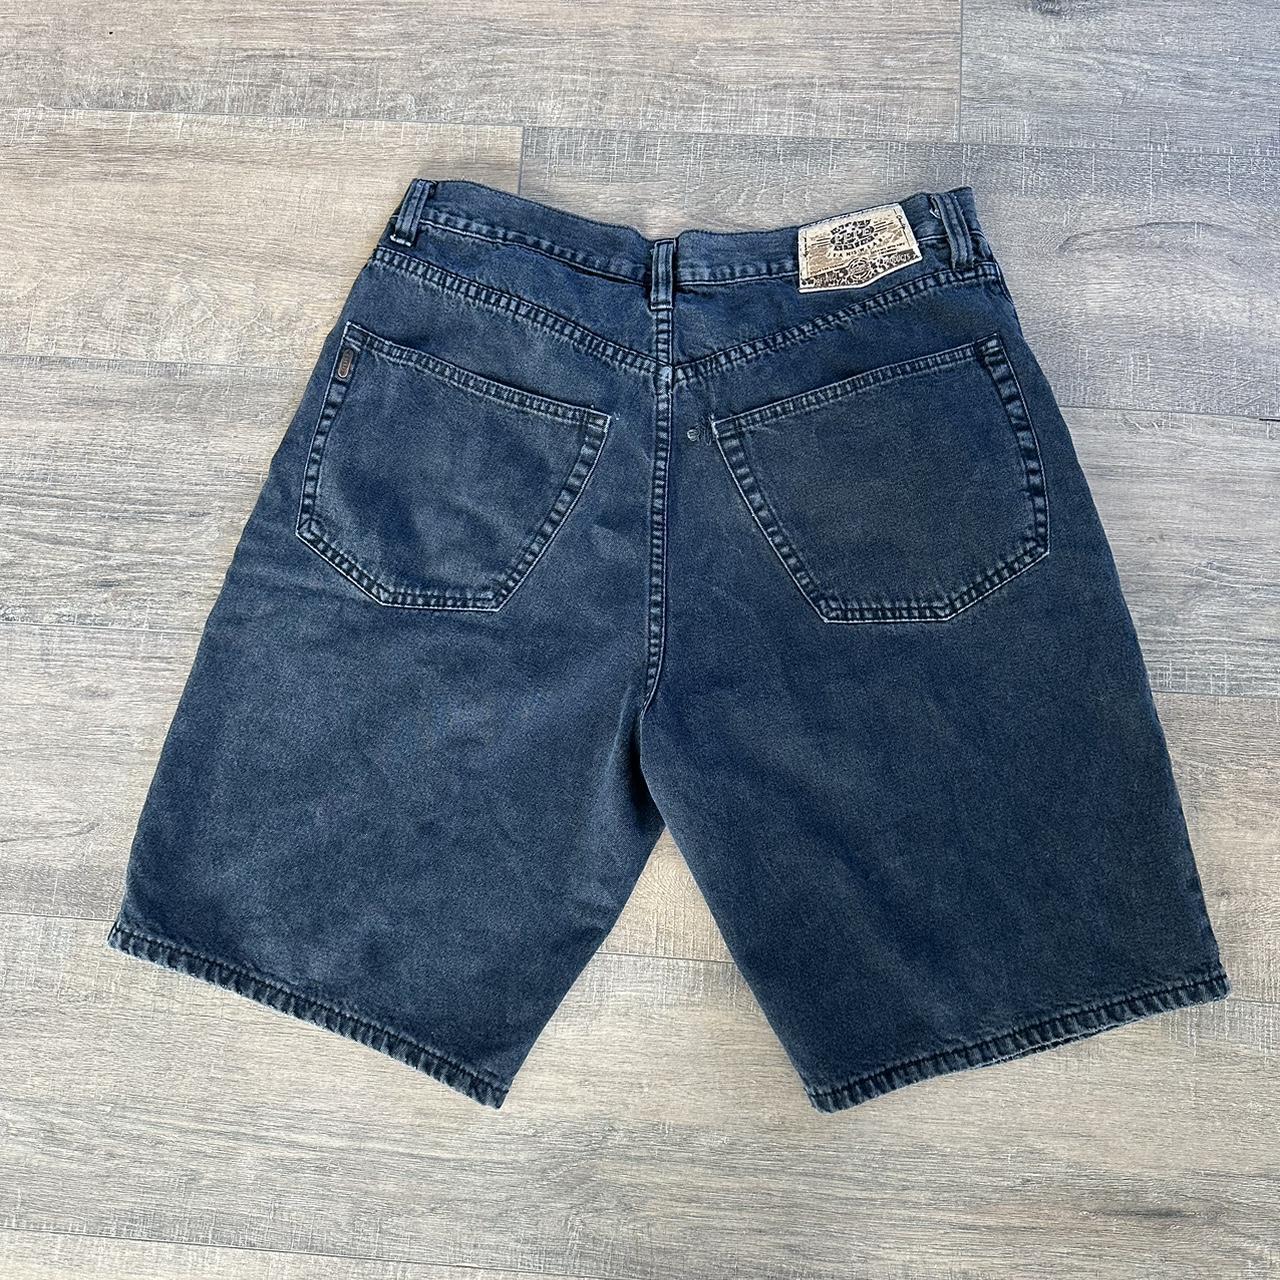 Pepe Made in London Jorts Navy Blue, was rigorously... - Depop